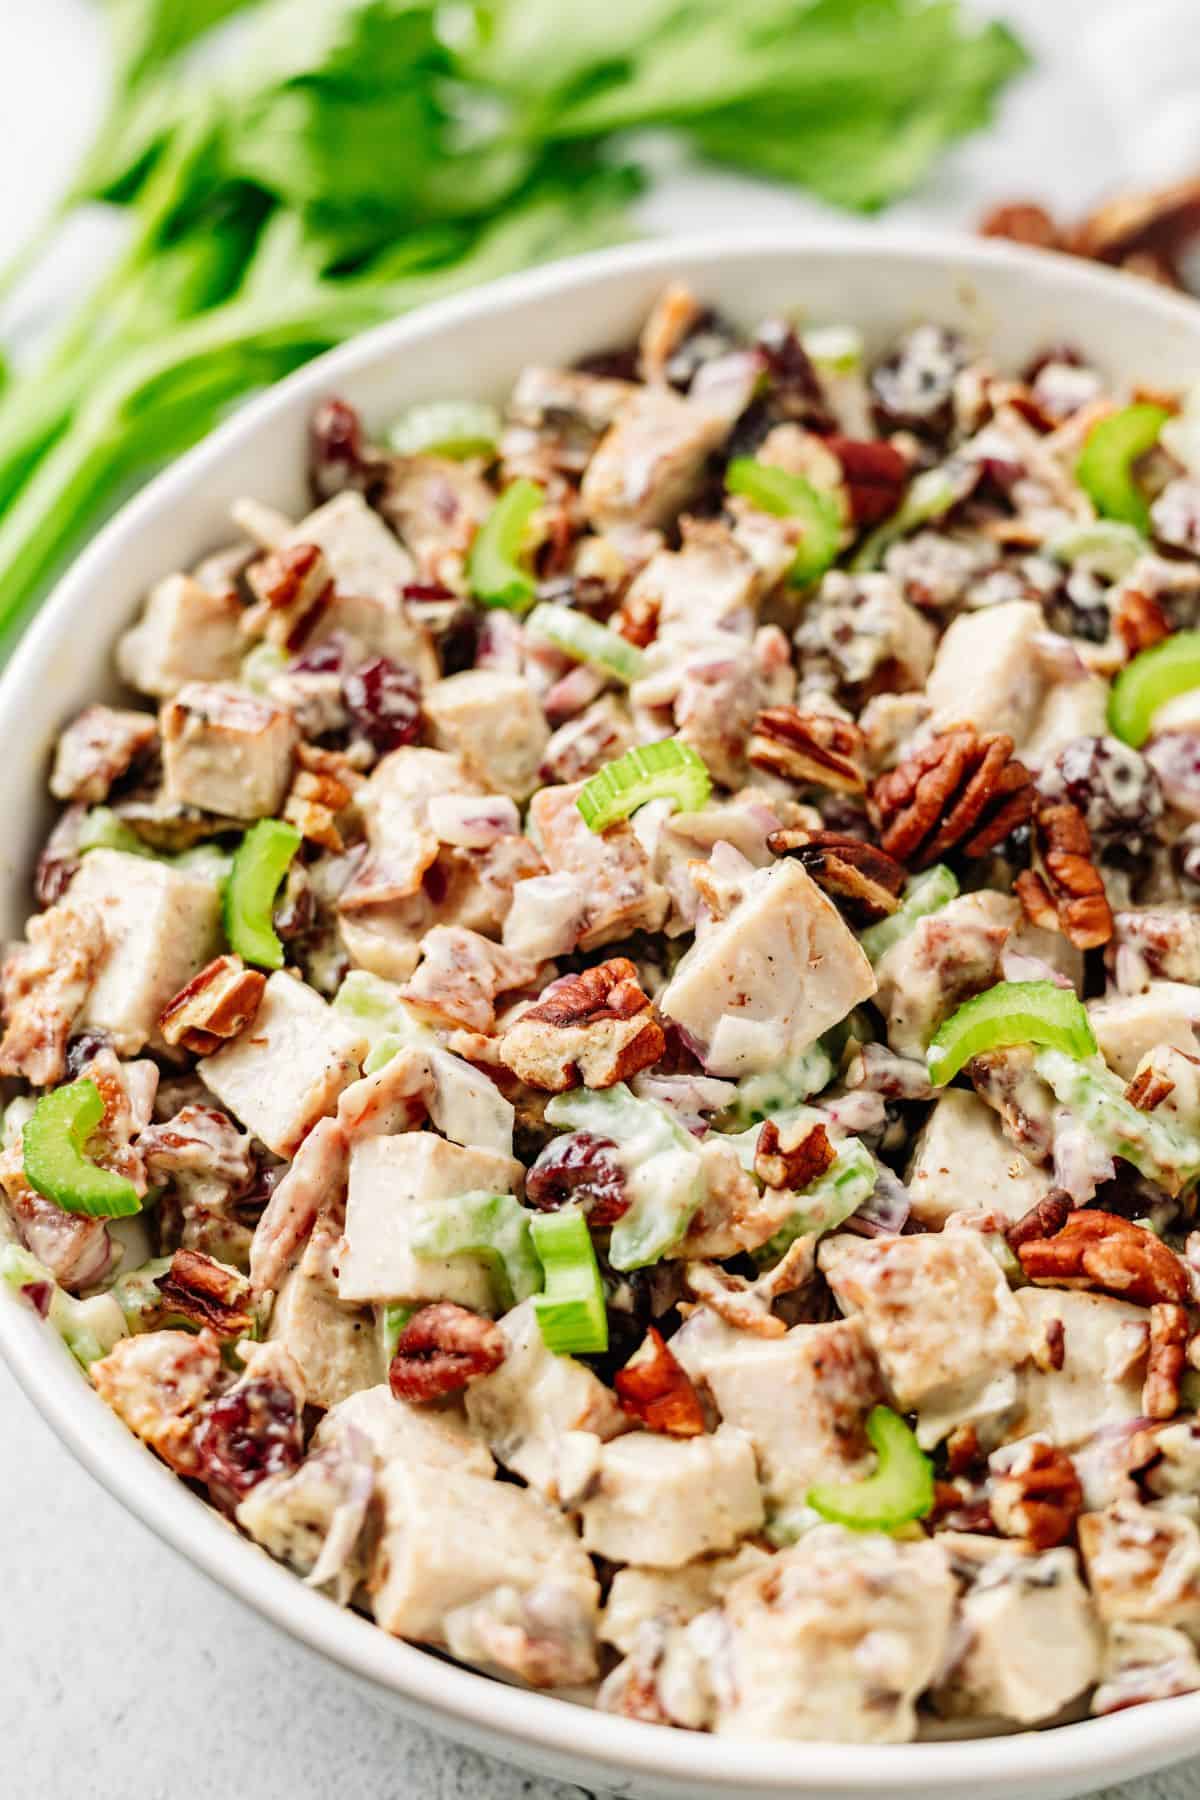 Leftover Turkey Salad with turkey breast and cranberries in a large bowl